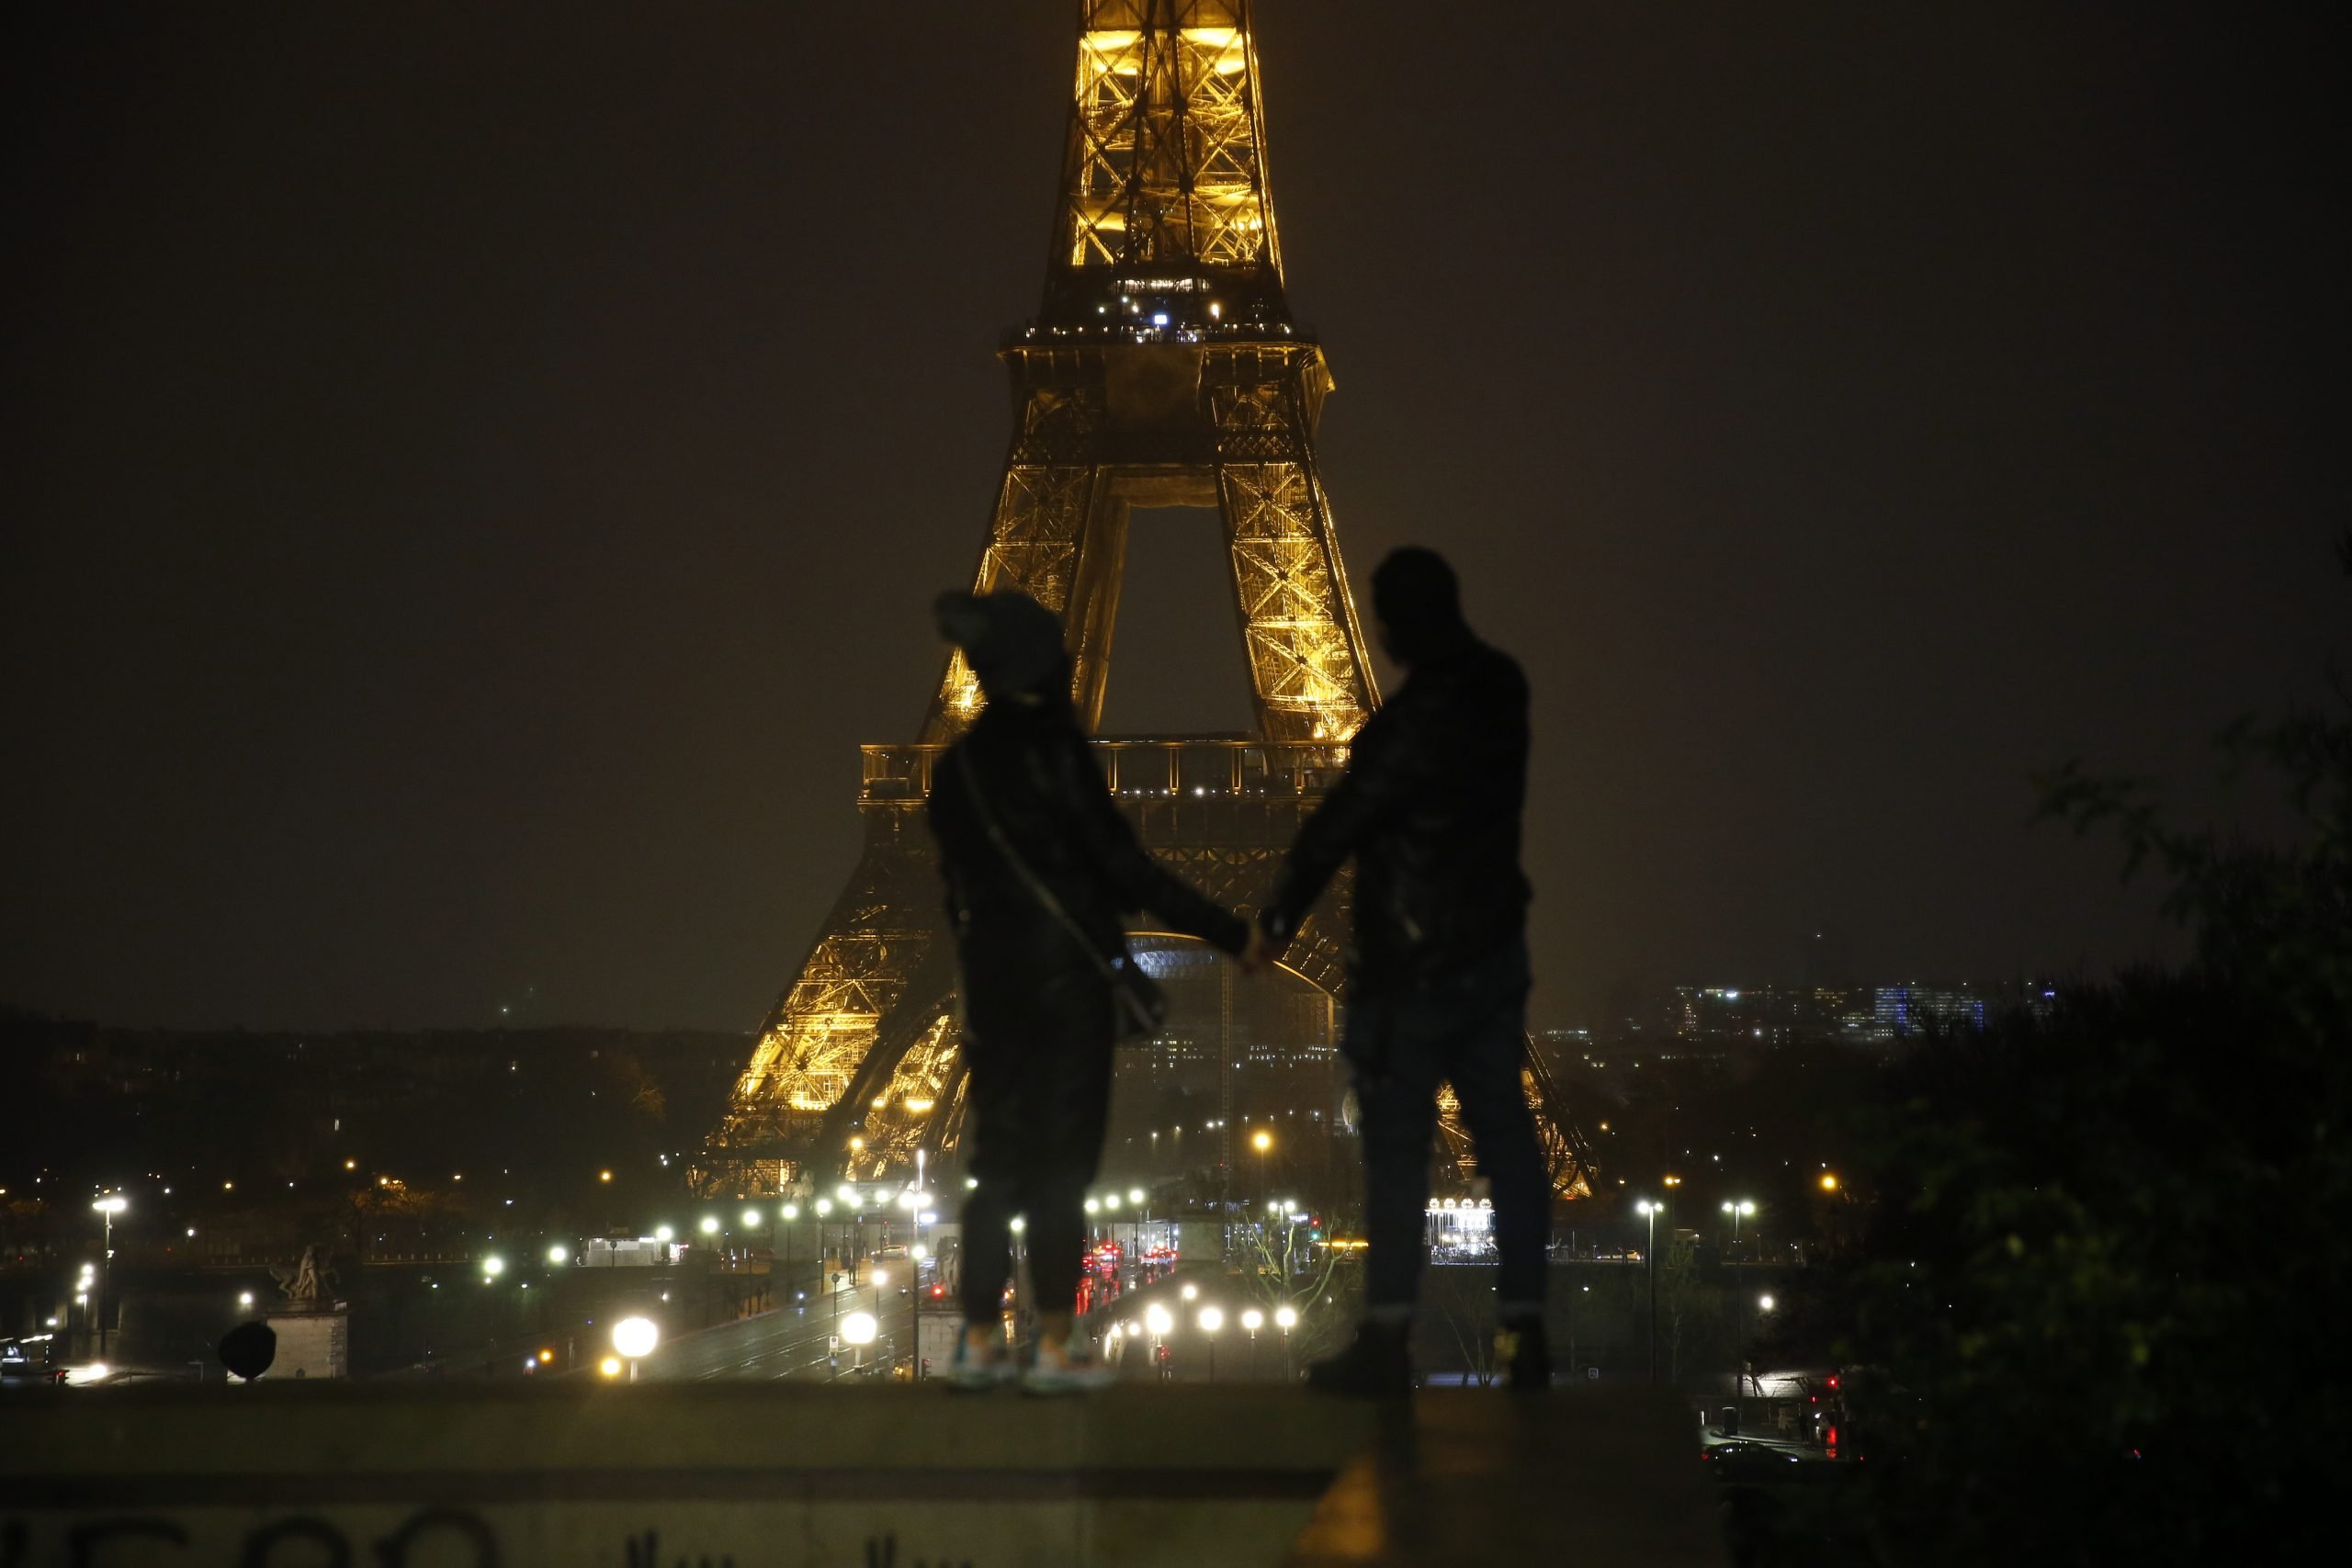 Paris Will Turn Off the Tower's Evening Lights Early in a Bid to Save Energy